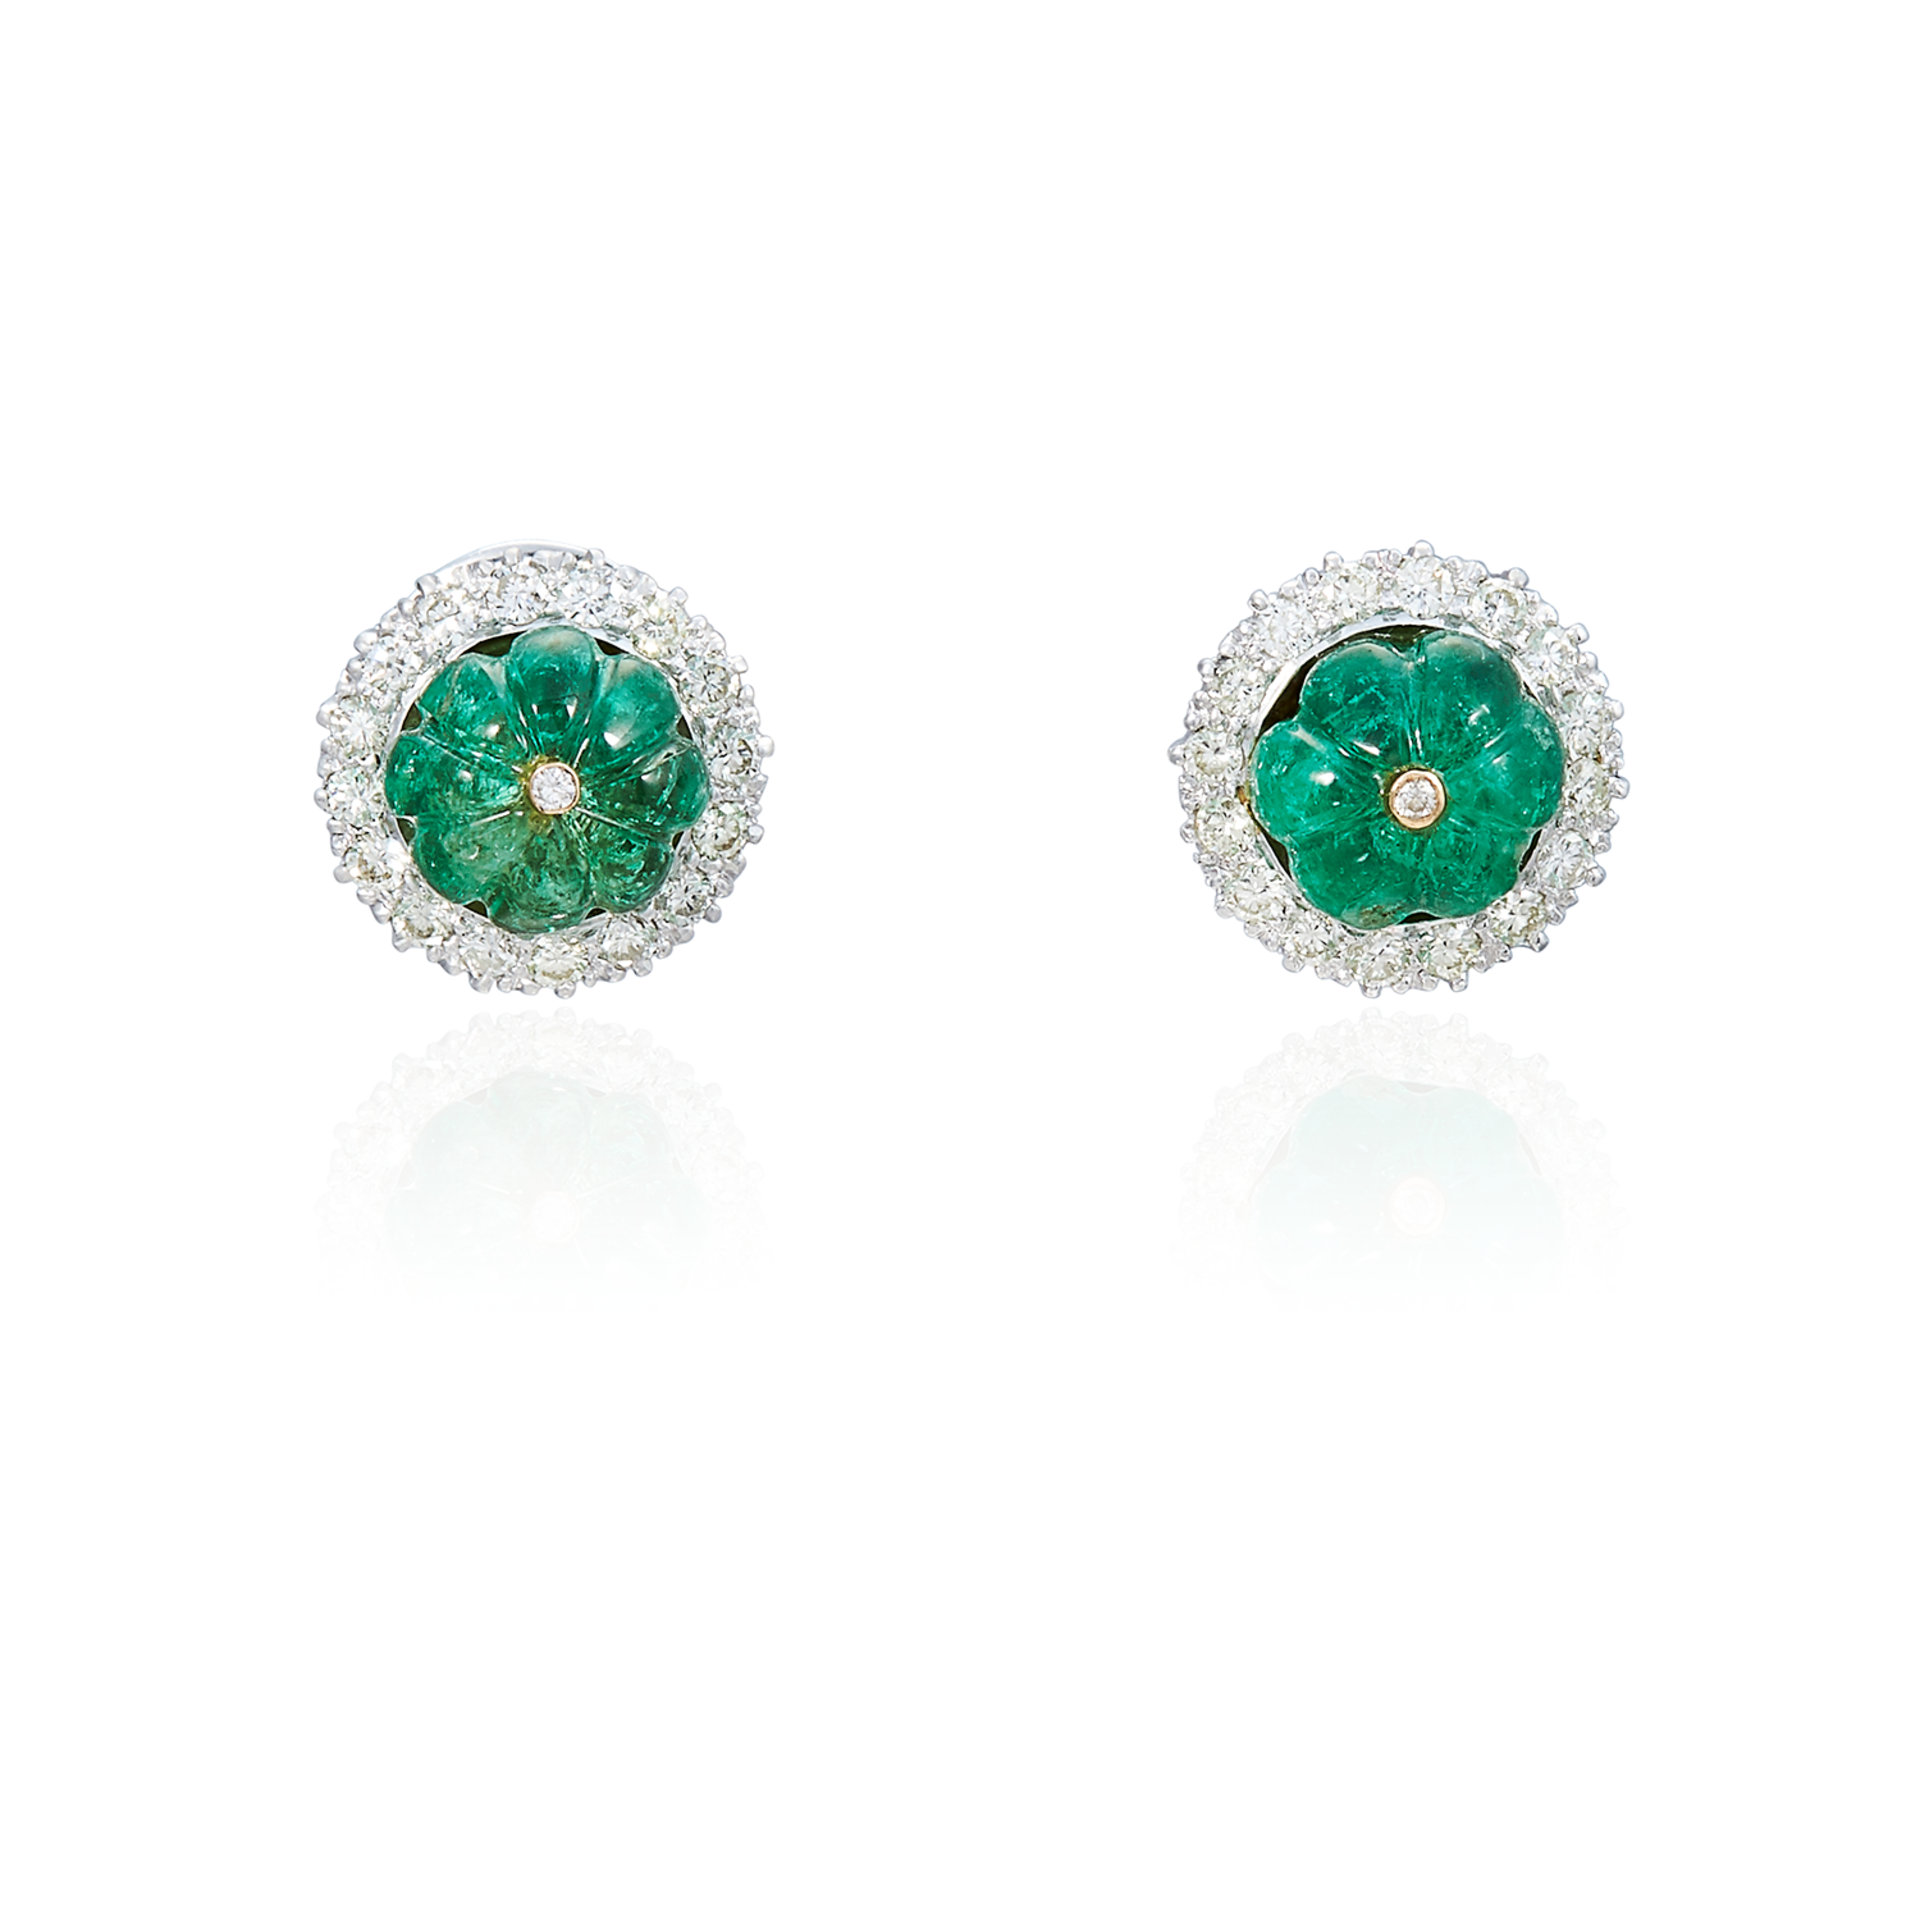 A PAIR OF CARVED EMERALD AND DIAMOND STUD EARRINGS in high 18ct white gold, each set with a circular